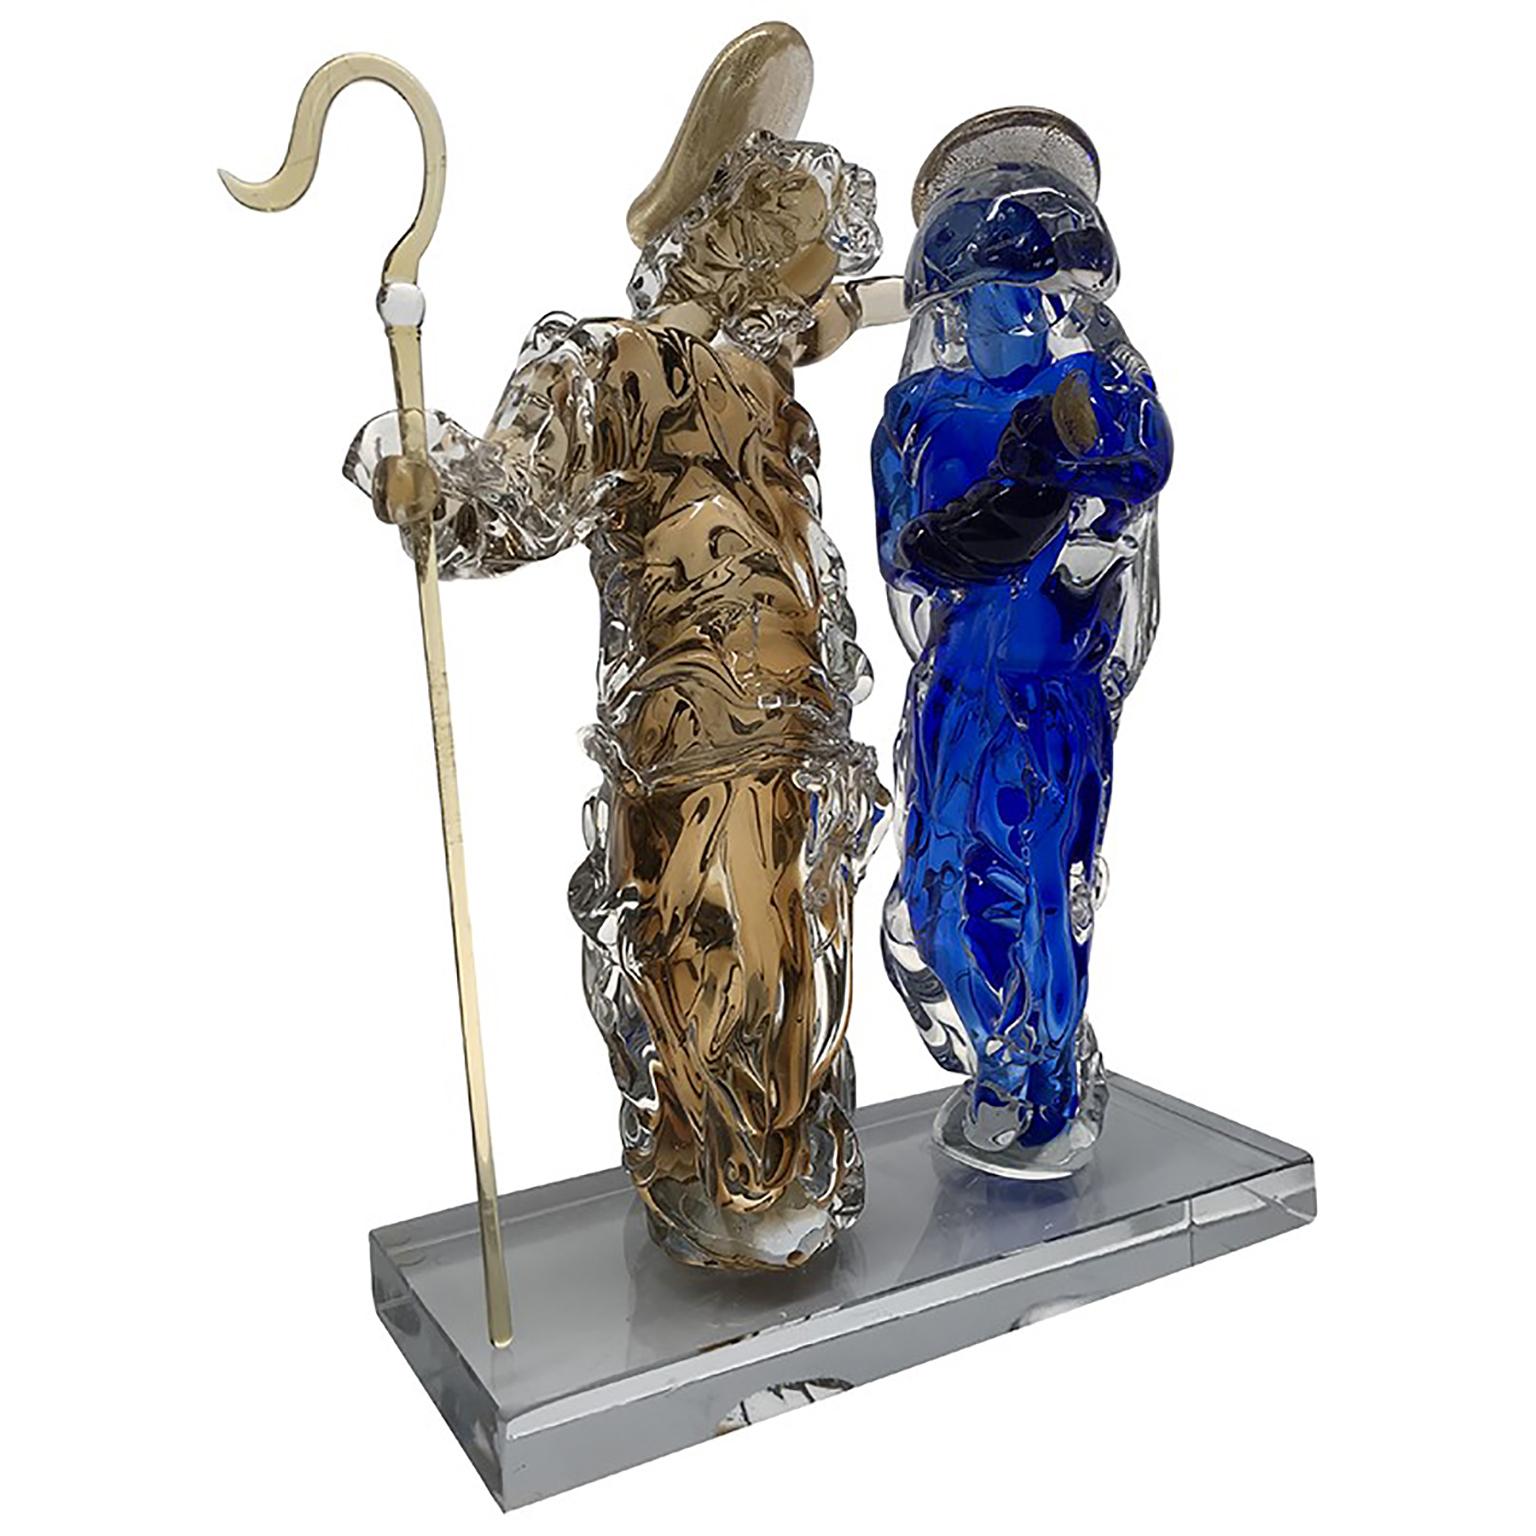 Aritistic Murano Glass Holy Family Sculpture by Roberto Beltrami For Sale